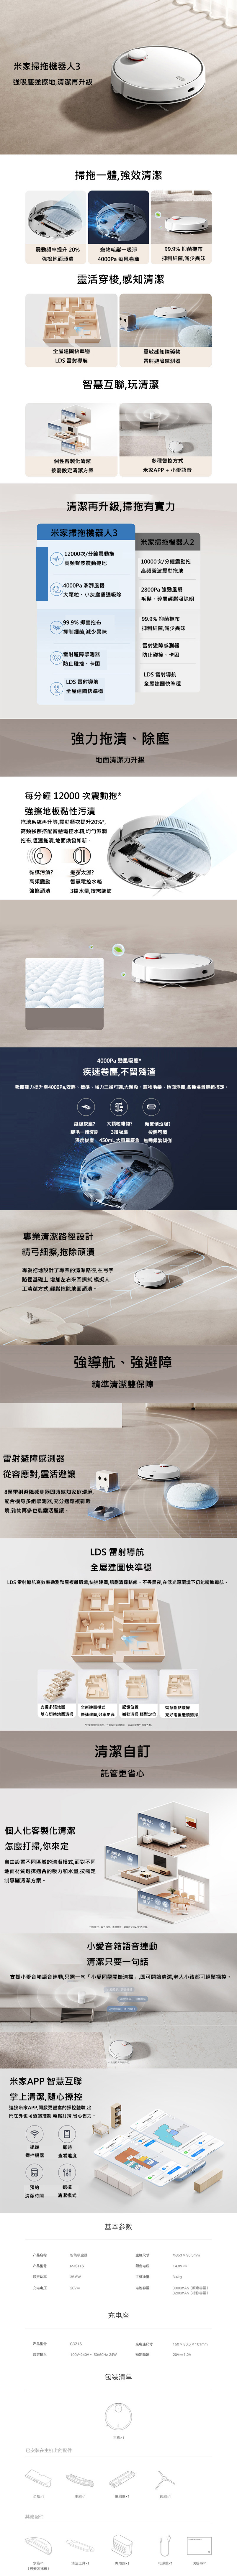 Xiaomi Mijia sweeping and mopping robot 3